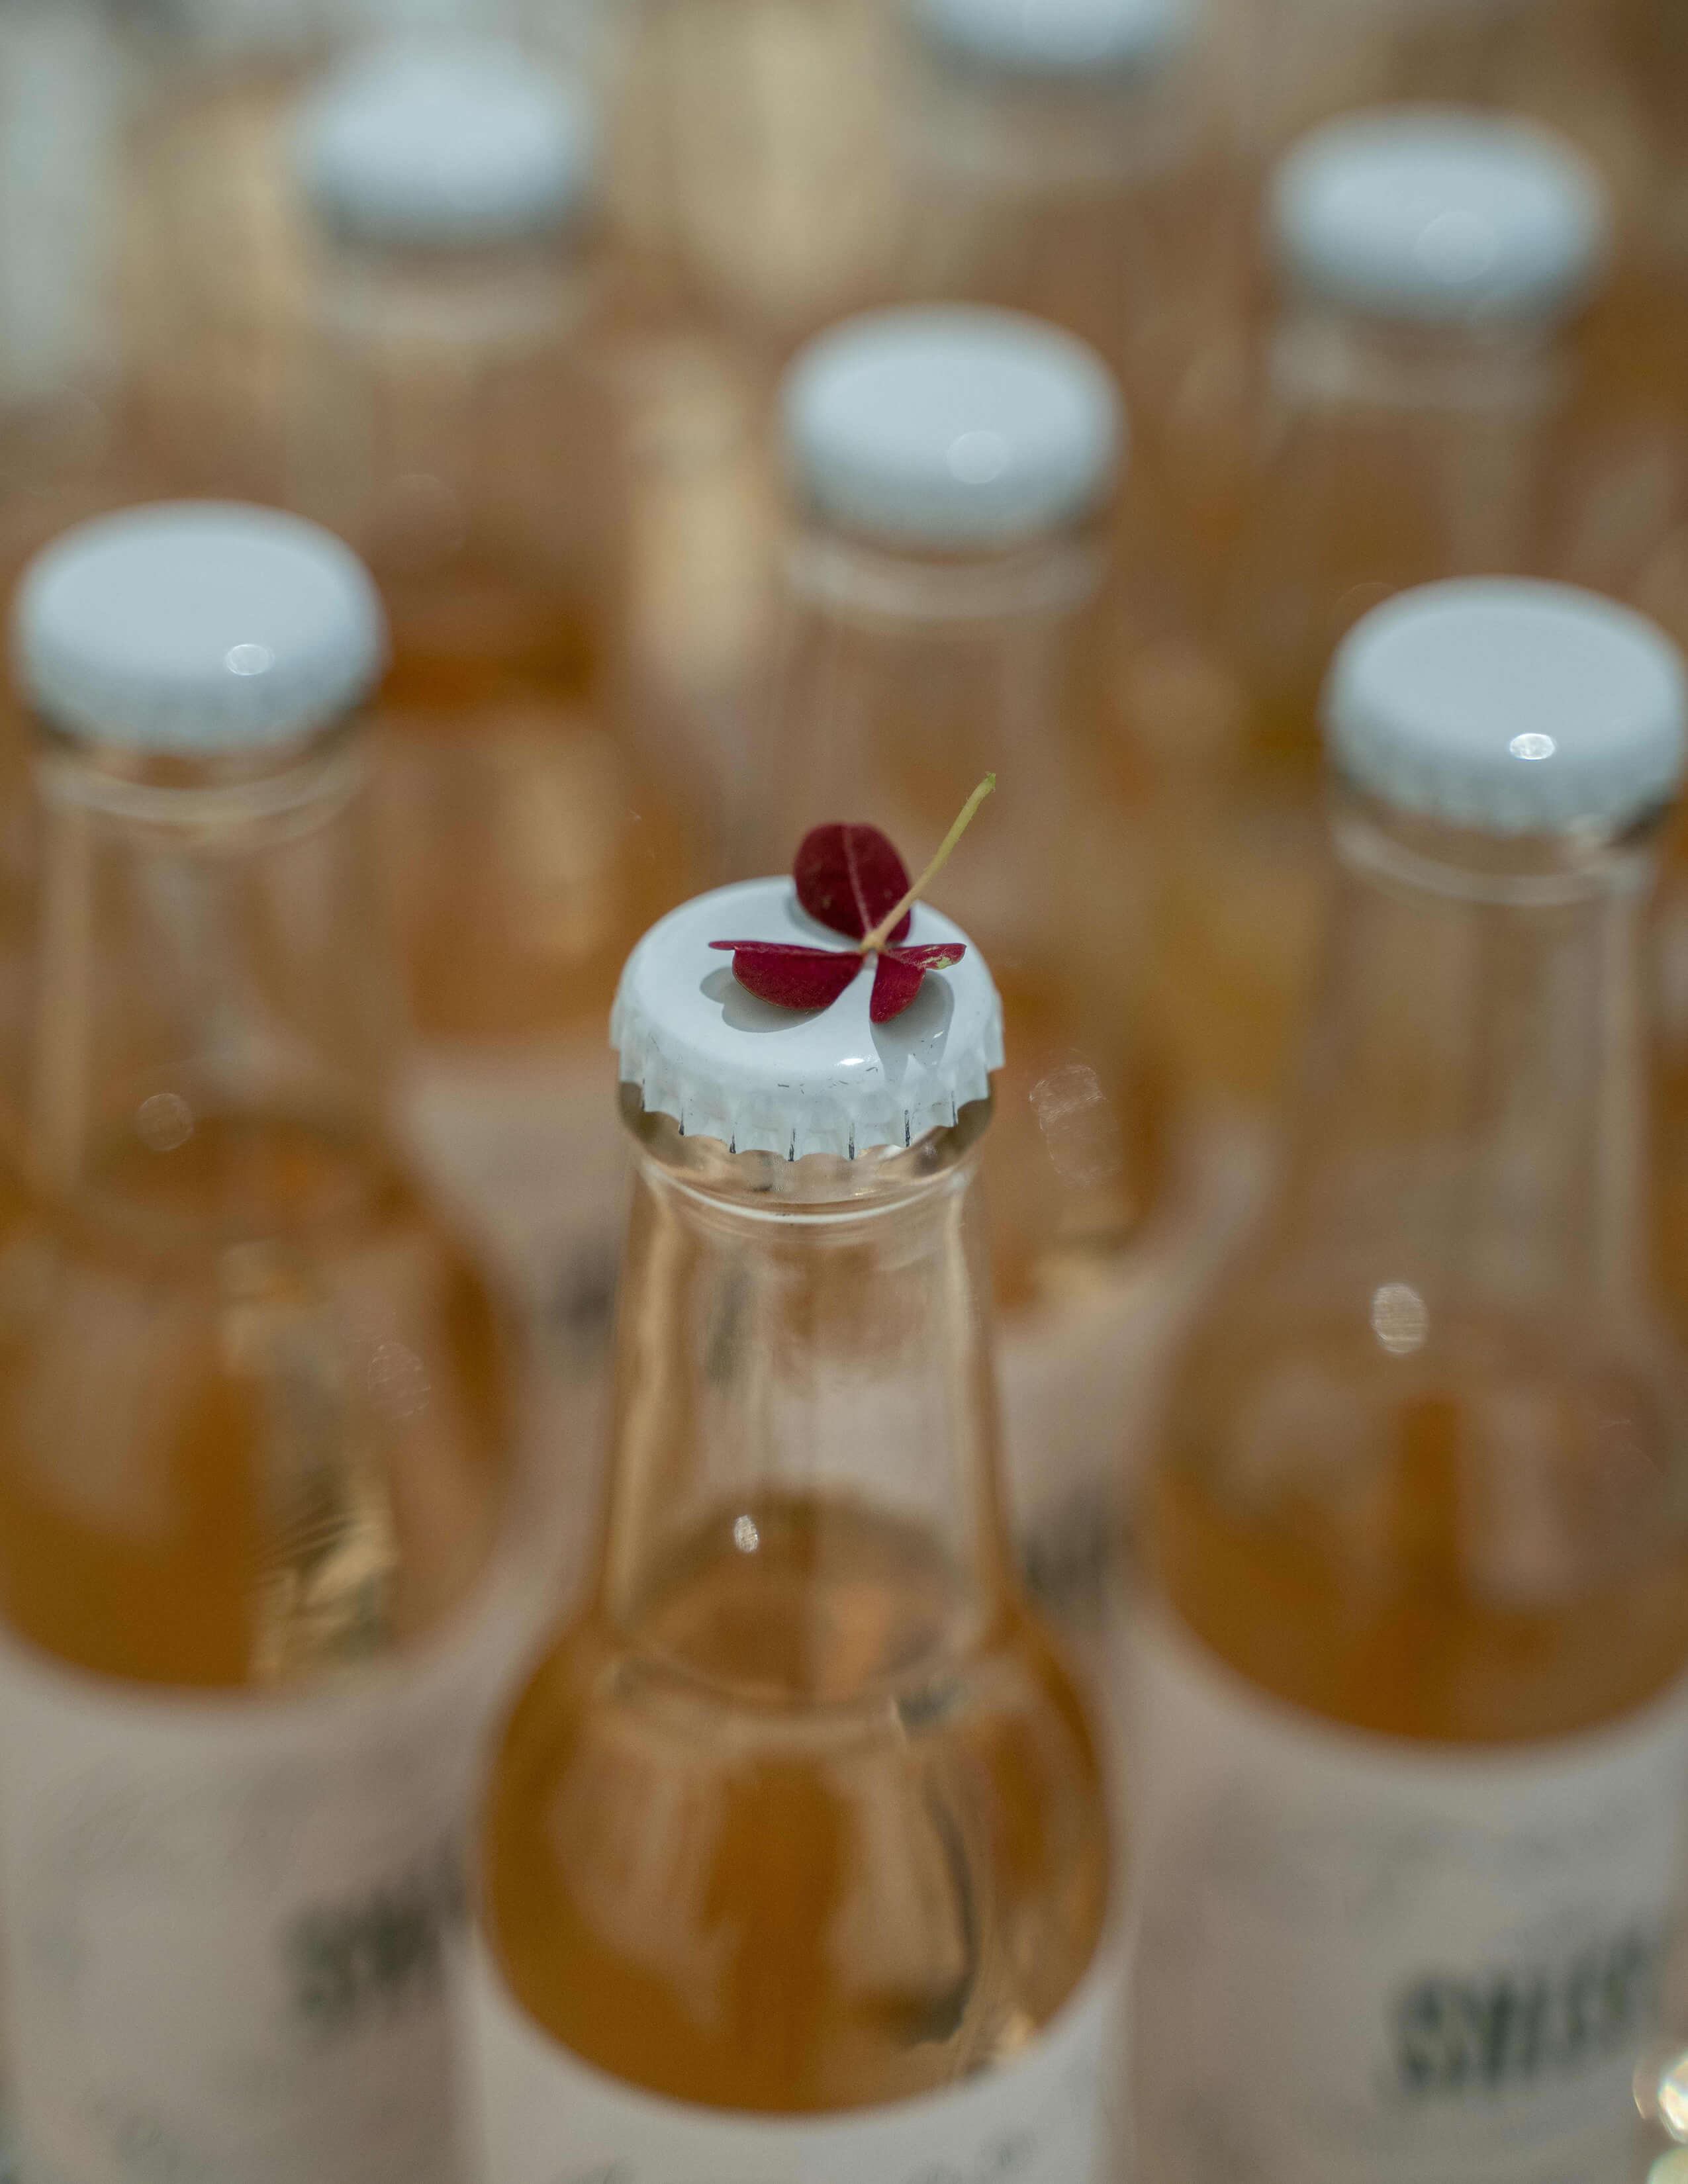 A photograph of a small 3-piece-red leaves plant laying on one of the caps of alcoholic bottles.